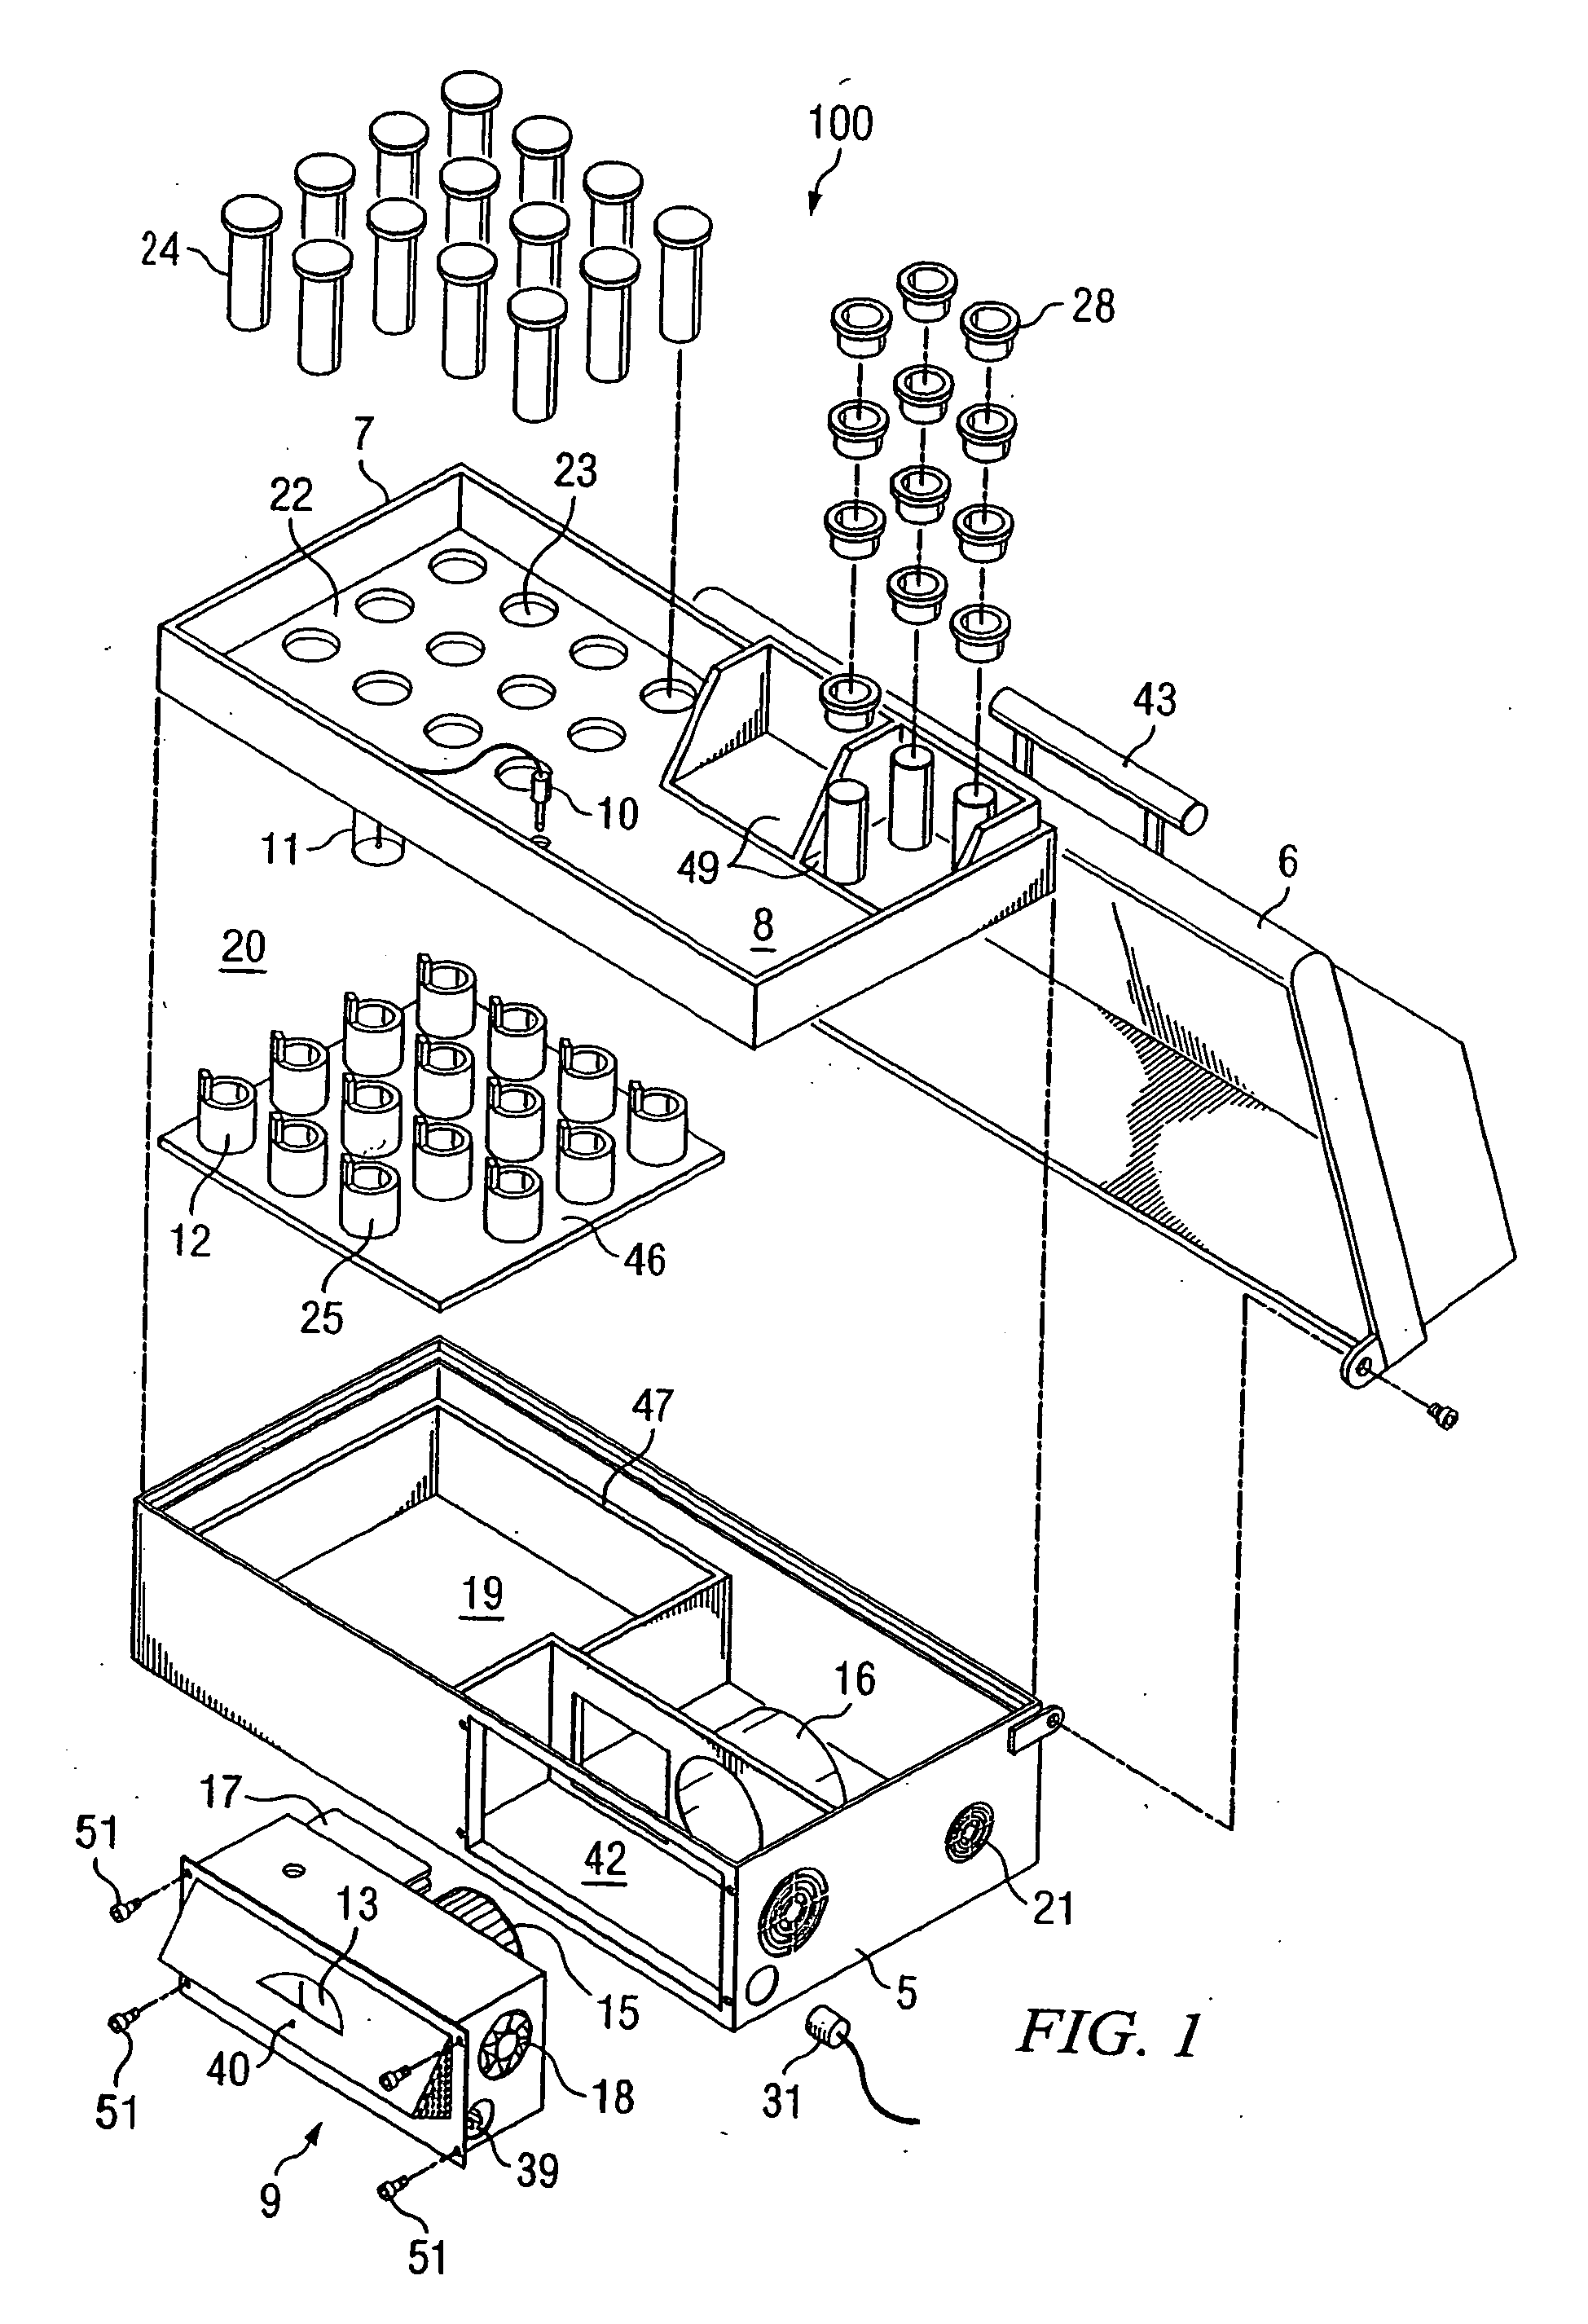 System and method for warming premature infant feedings